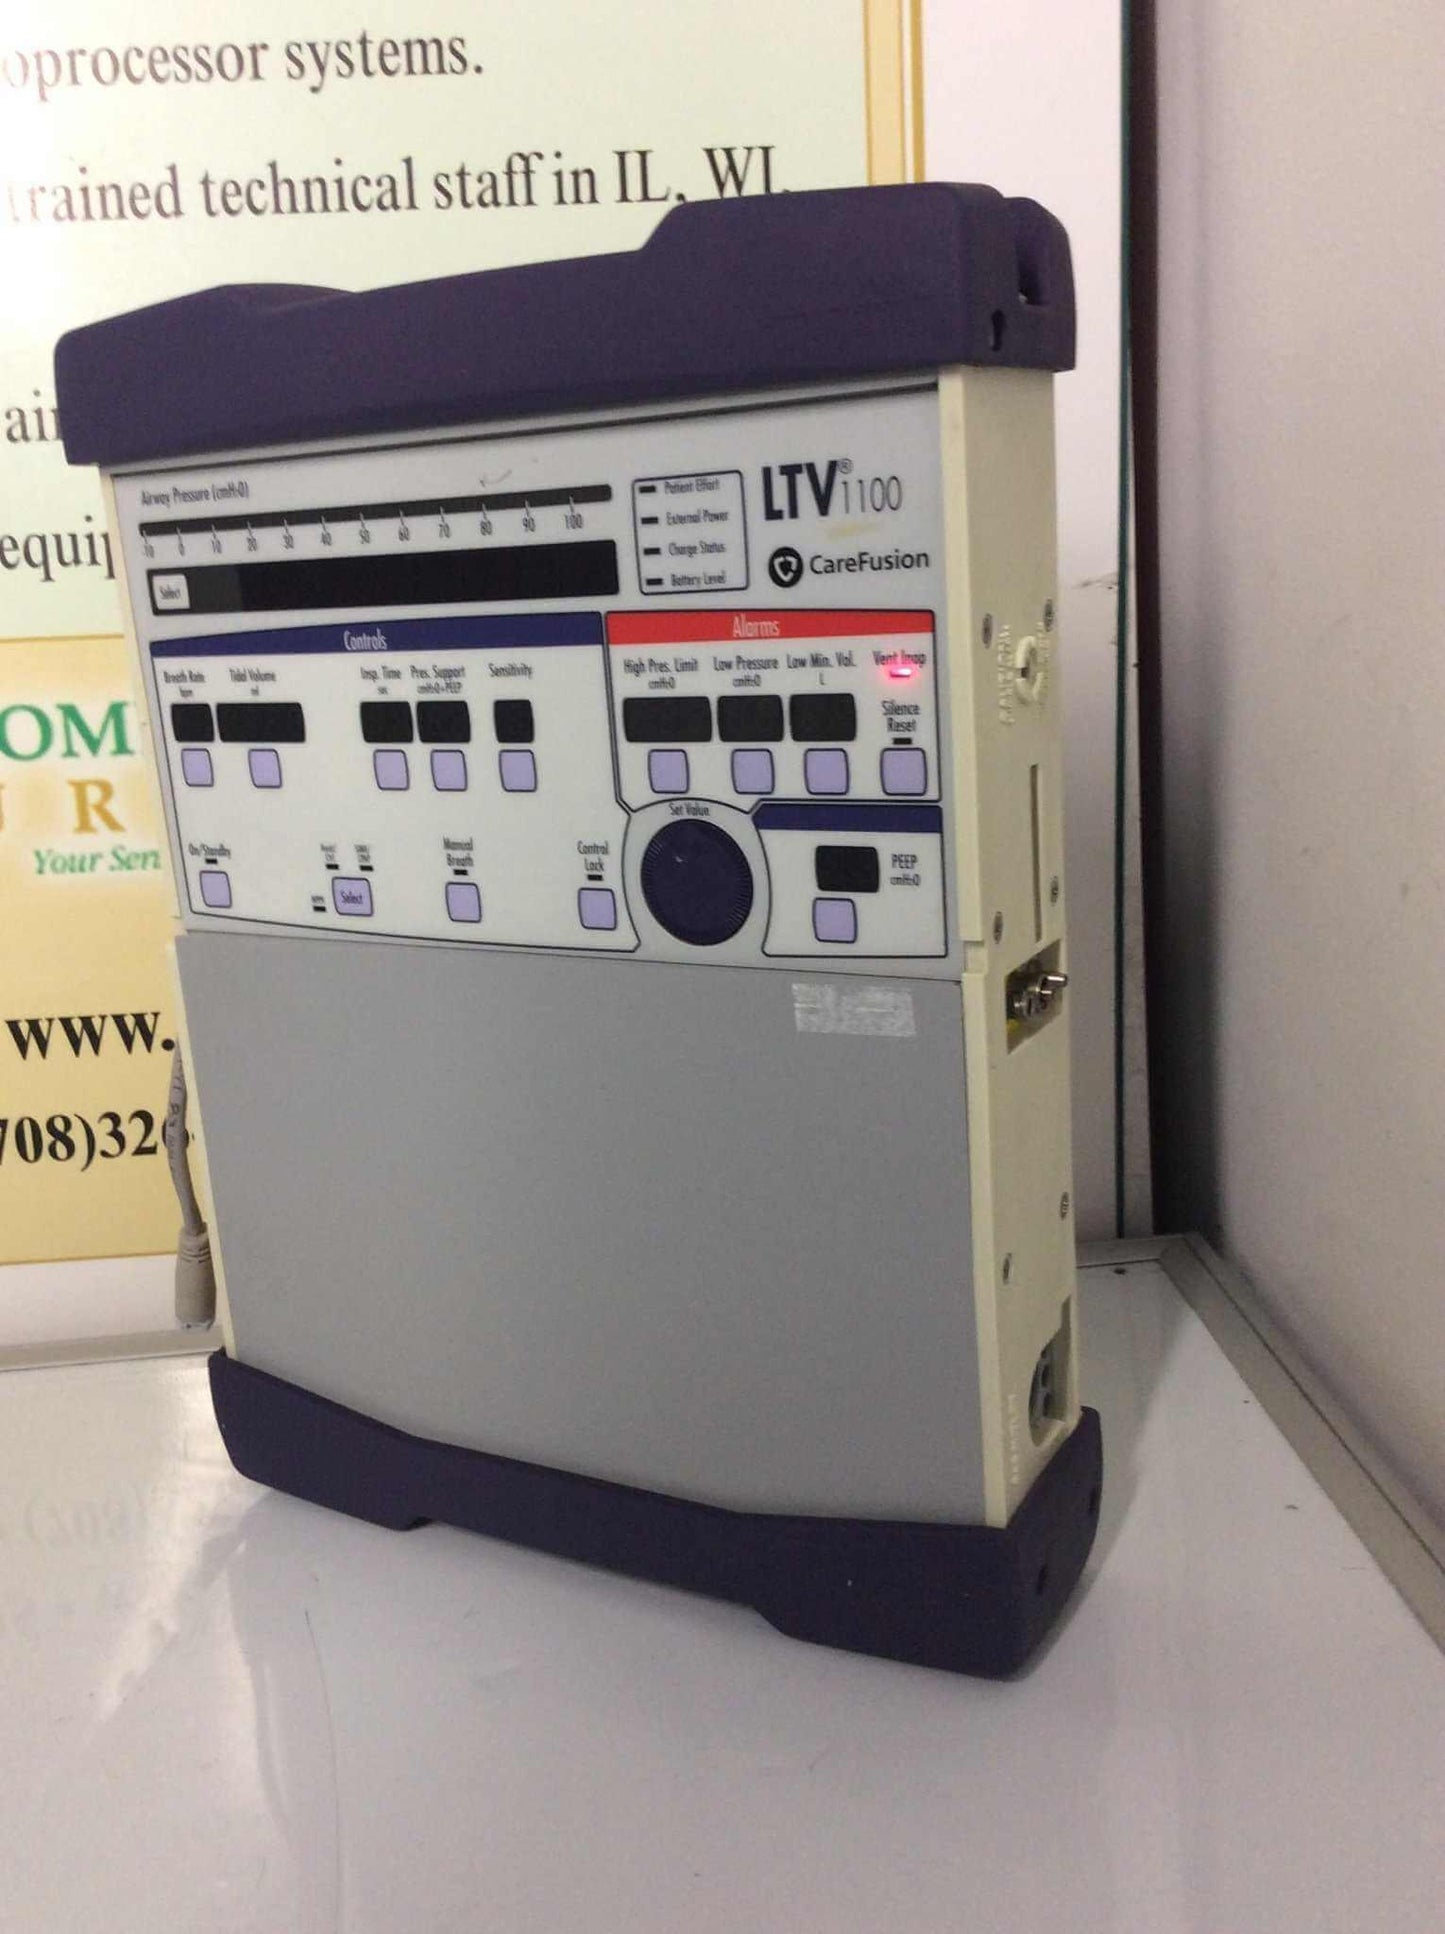 USED Carefusion LTV 1100 Ventilator not Patient Ready Warranty Free Shipping - MBR Medicals